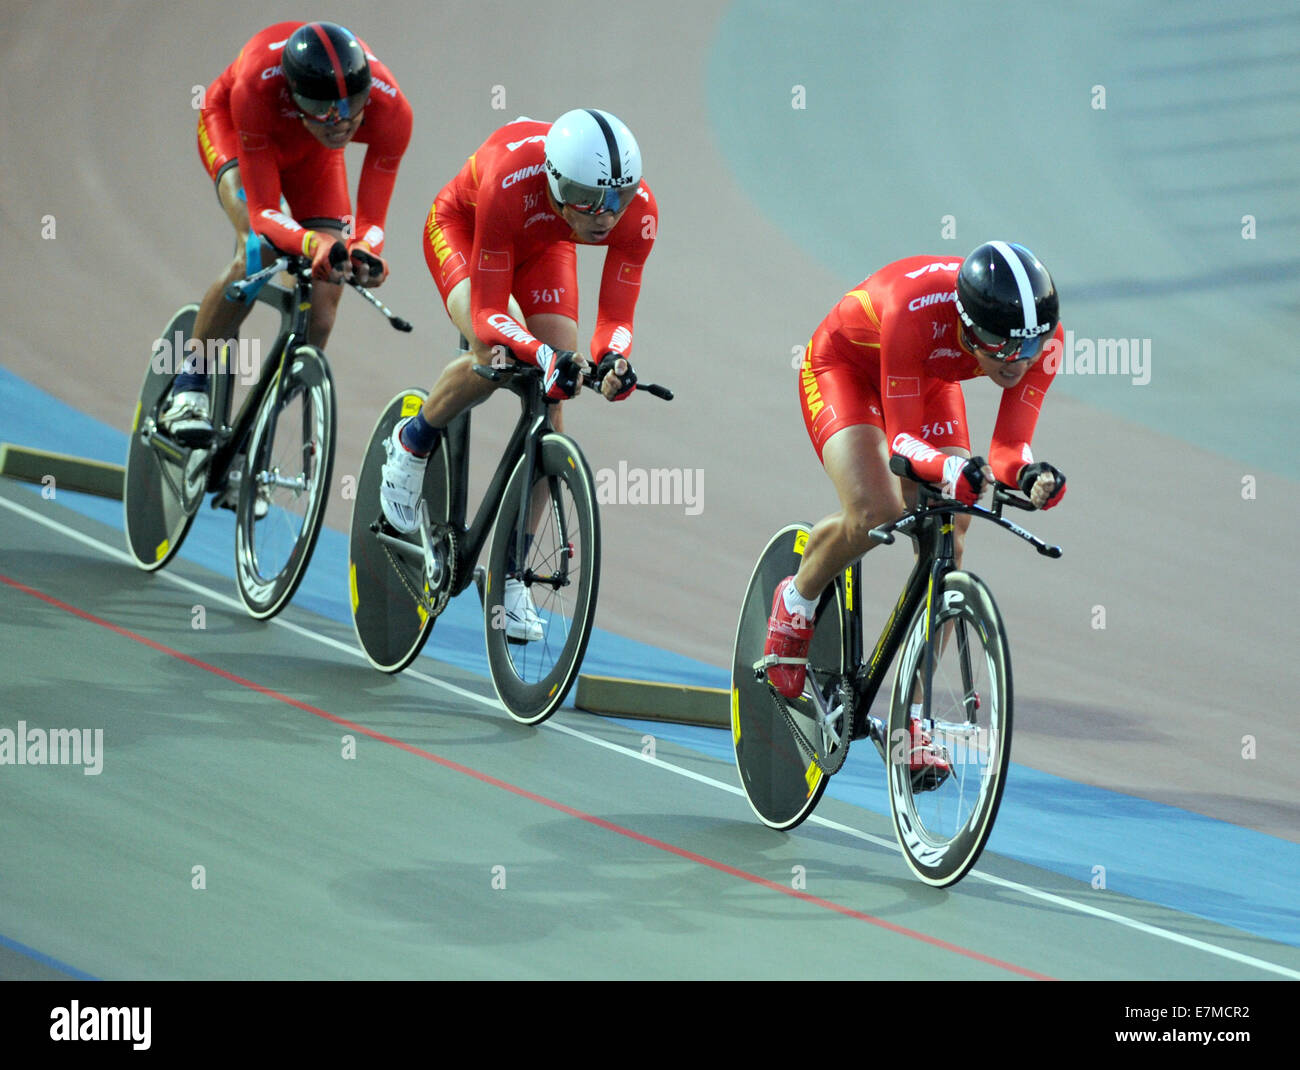 Incheon, South Korea. 21st Sep, 2014. Qin Hailu, Shi Tao and Liu Hao (R to L) of China compete during the men's team pursuit finals of cycling track competition at the 17th Asian Games in Incheon, South Korea, Sept. 21, 2014. Chinese team won the gold medal. Credit:  Lo Ping Fai/Xinhua/Alamy Live News Stock Photo